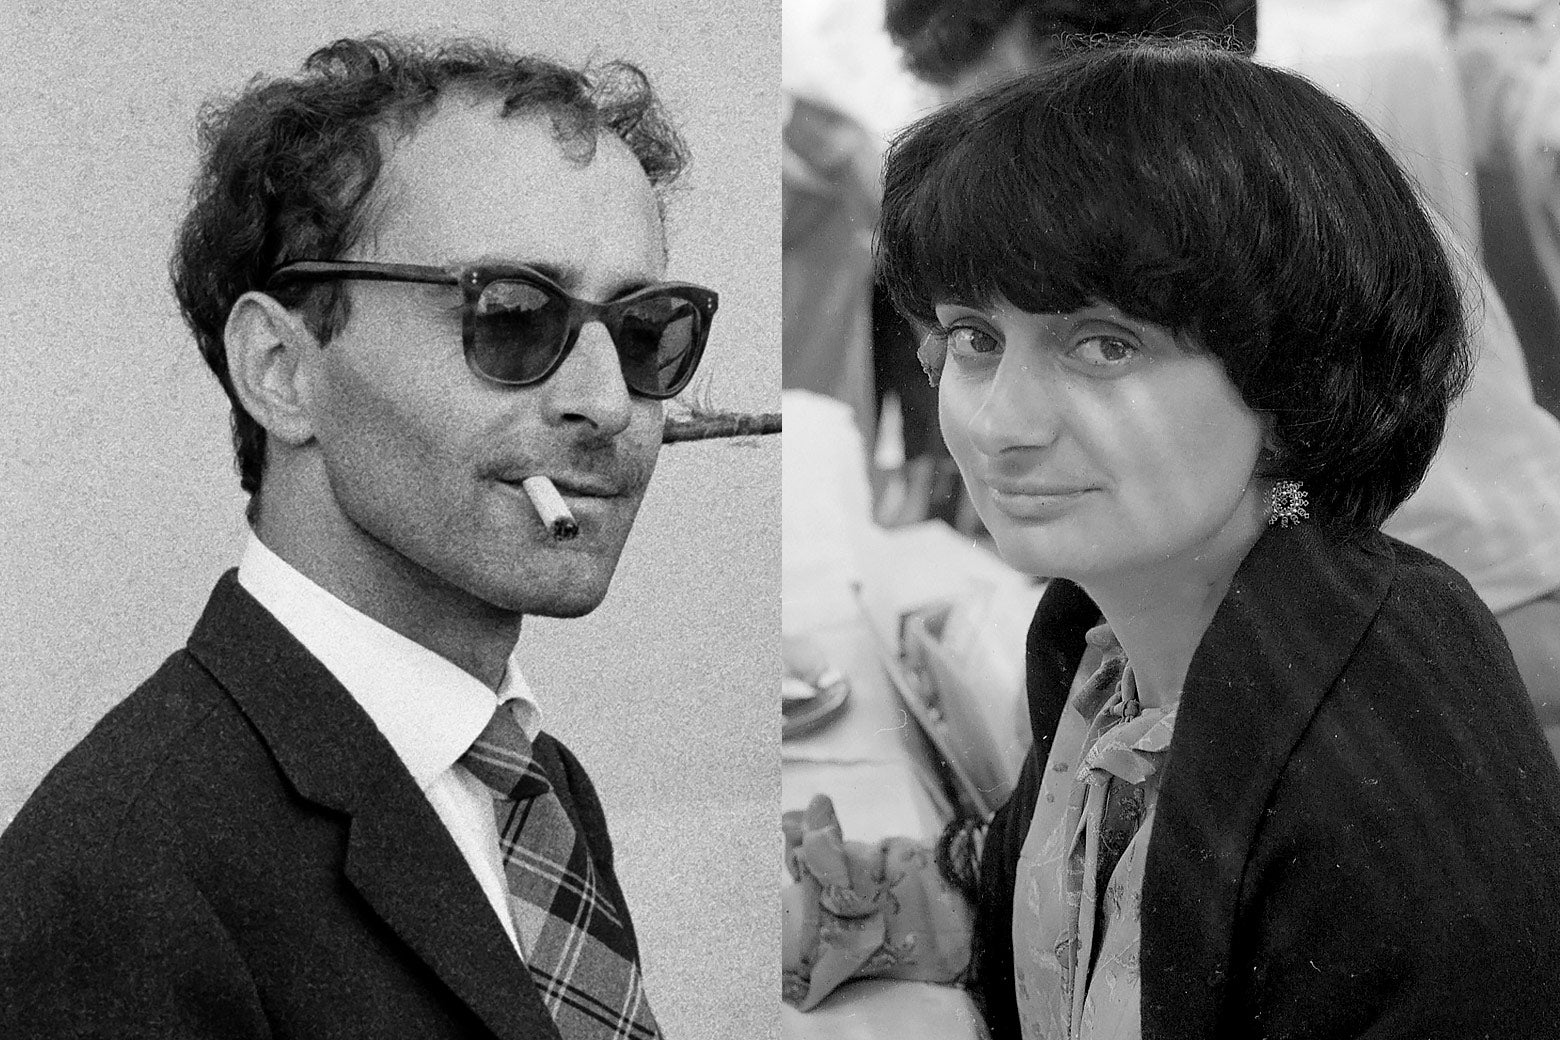 Two black and white photos side by side show the filmmakers looking young and stylish, Godard in a suit and his signature sunglasses and a cigarette dangling from his mouth, Varda with her trademark mop haircut